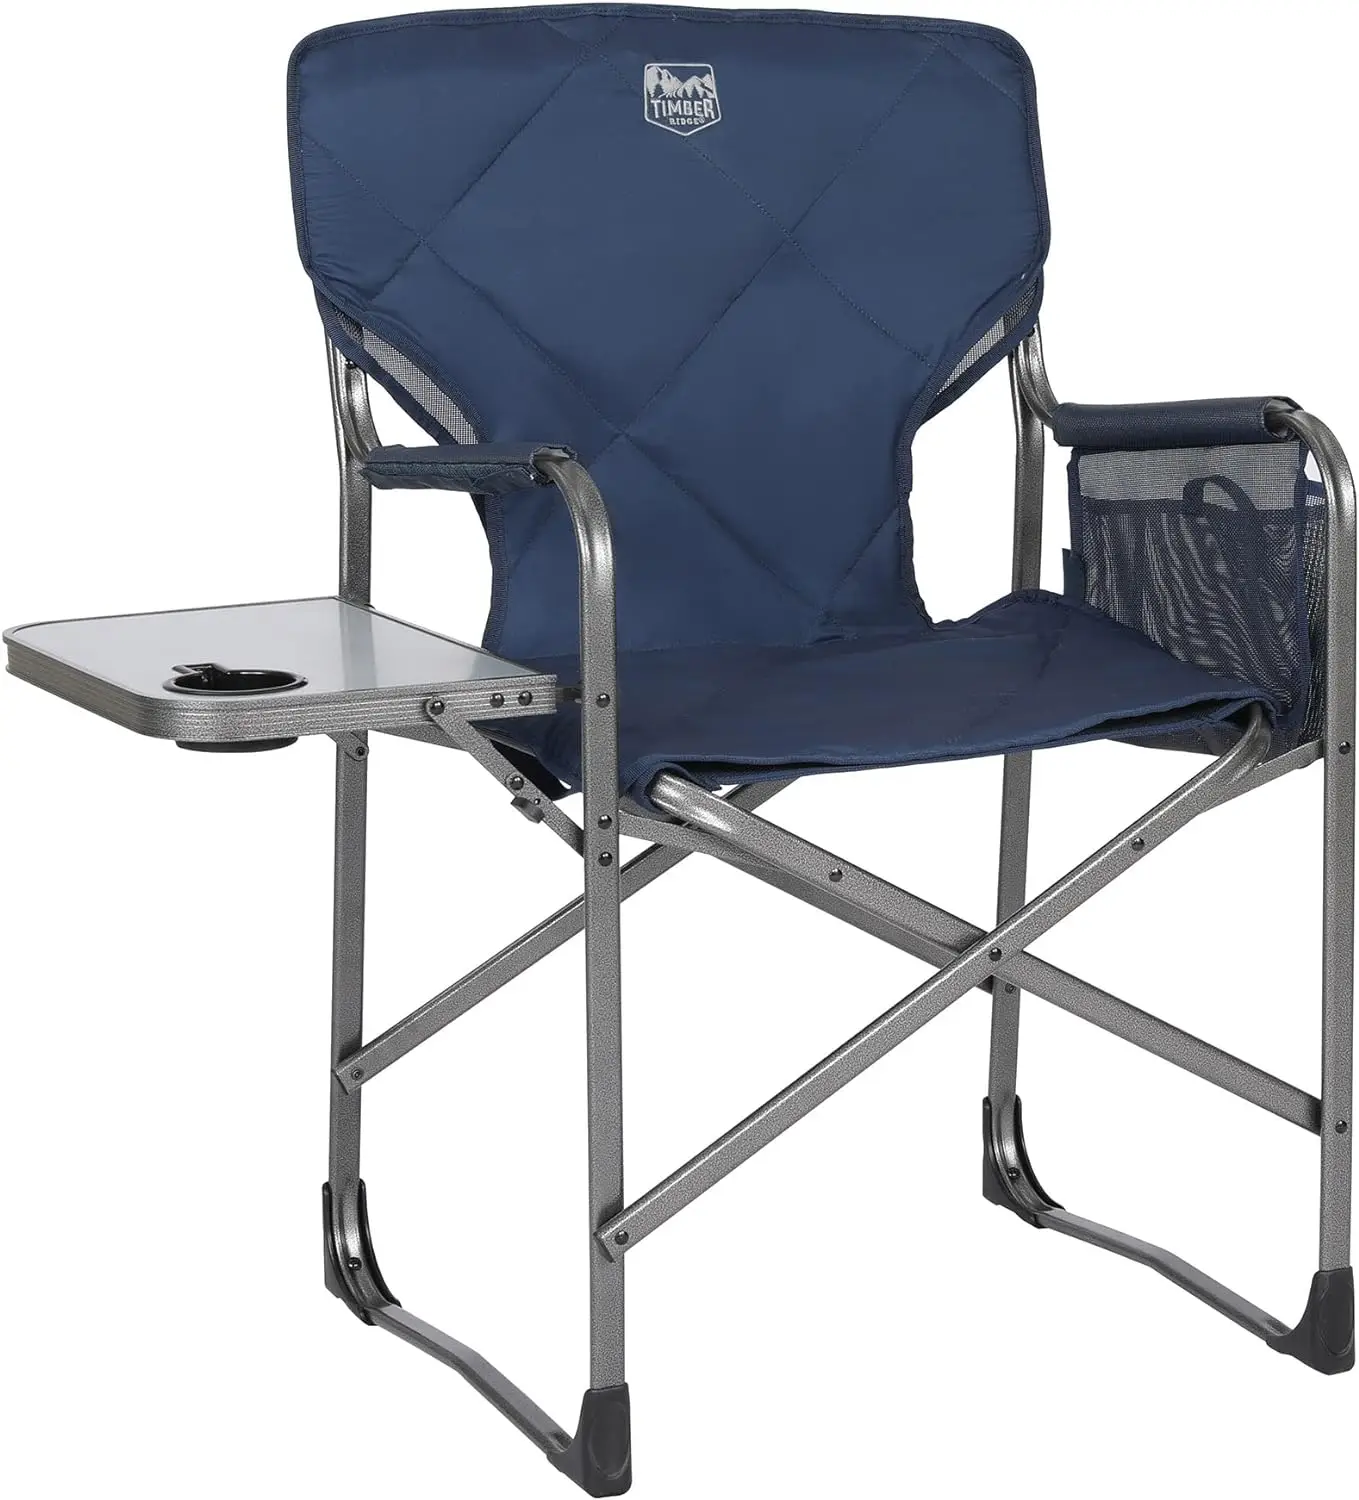 Nd cold outdoor folding chairs with cup holder and storage pouch ideal for camping lawn thumb200